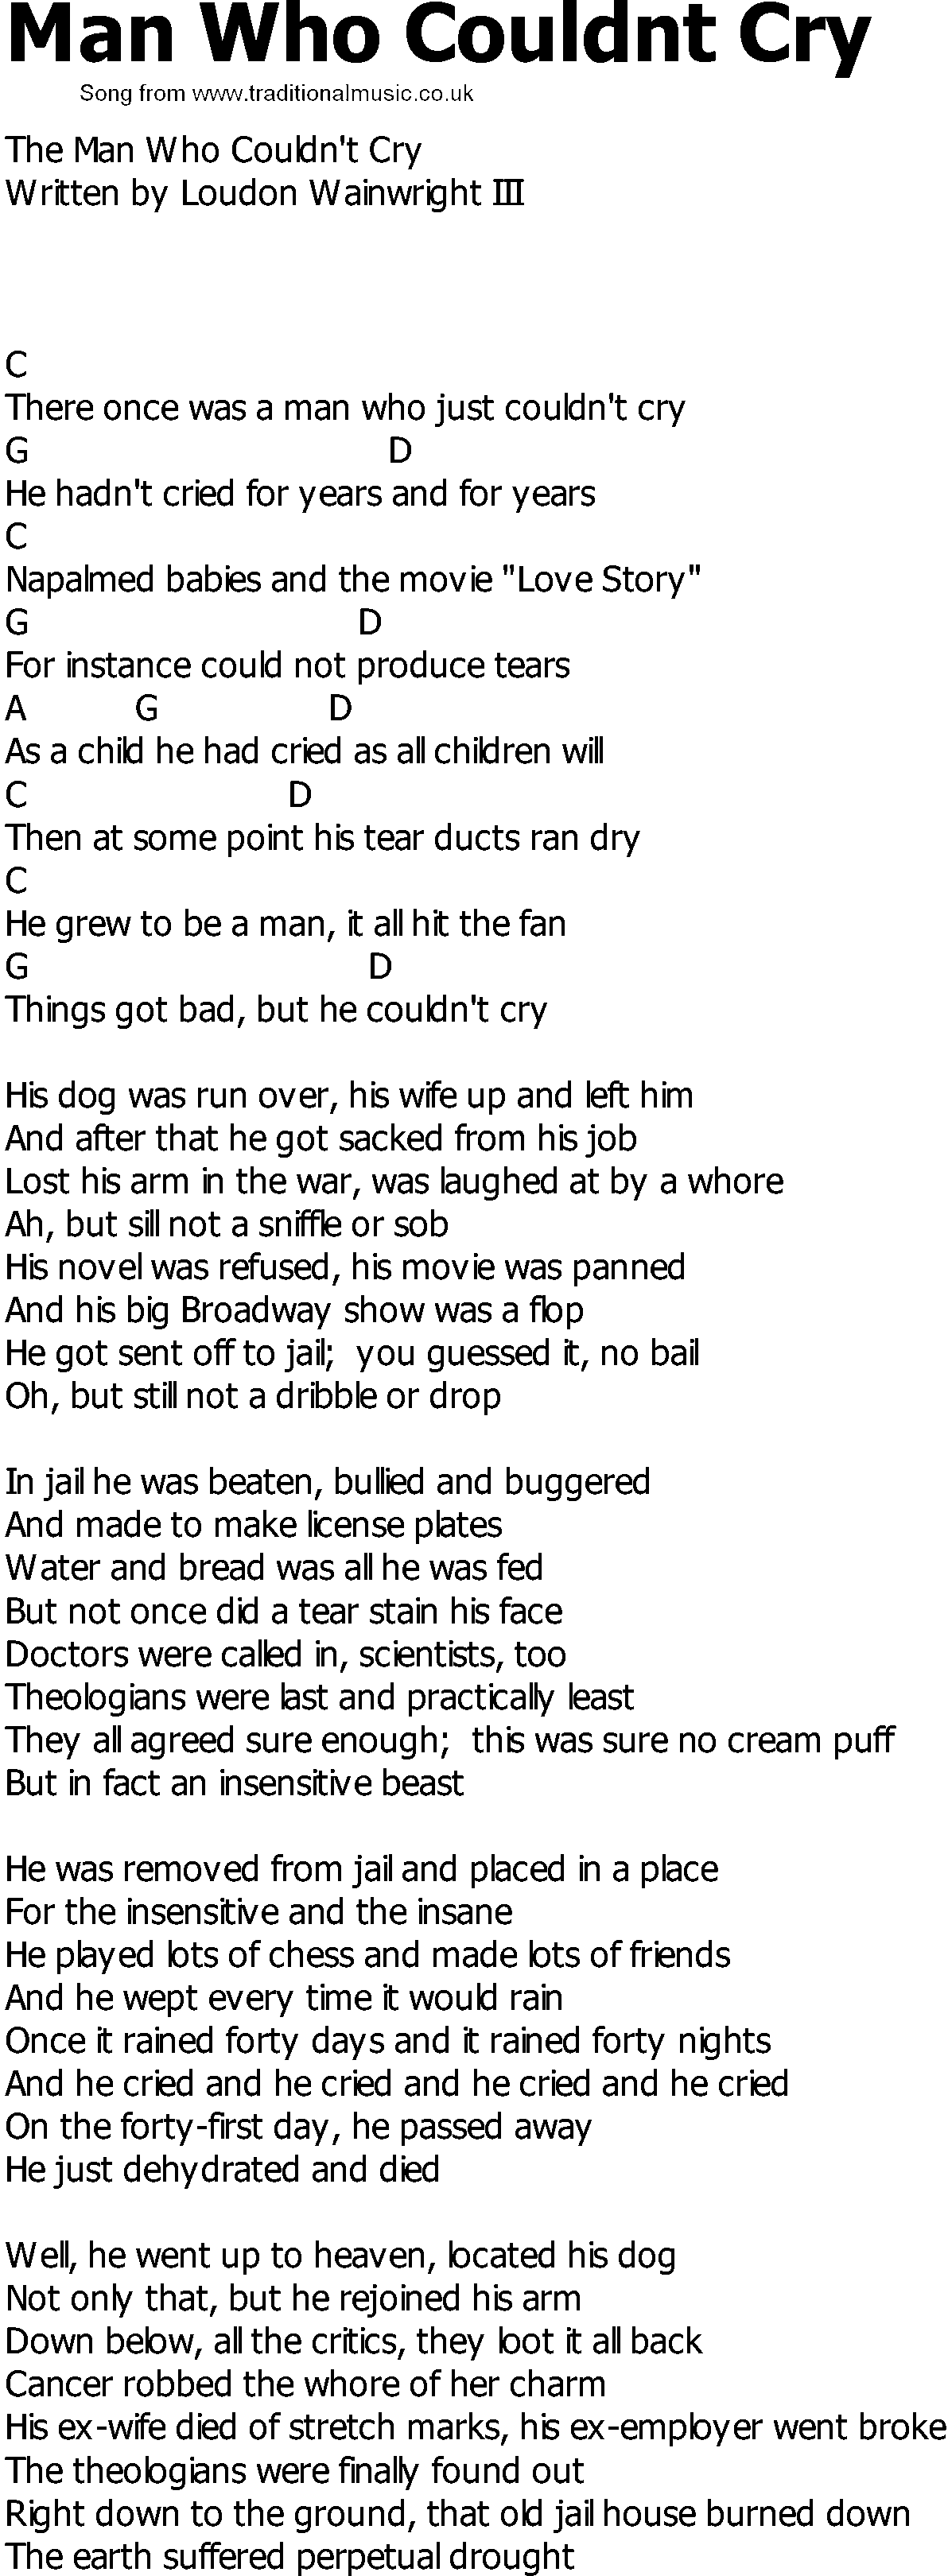 Old Country song lyrics with chords - Man Who Couldnt Cry